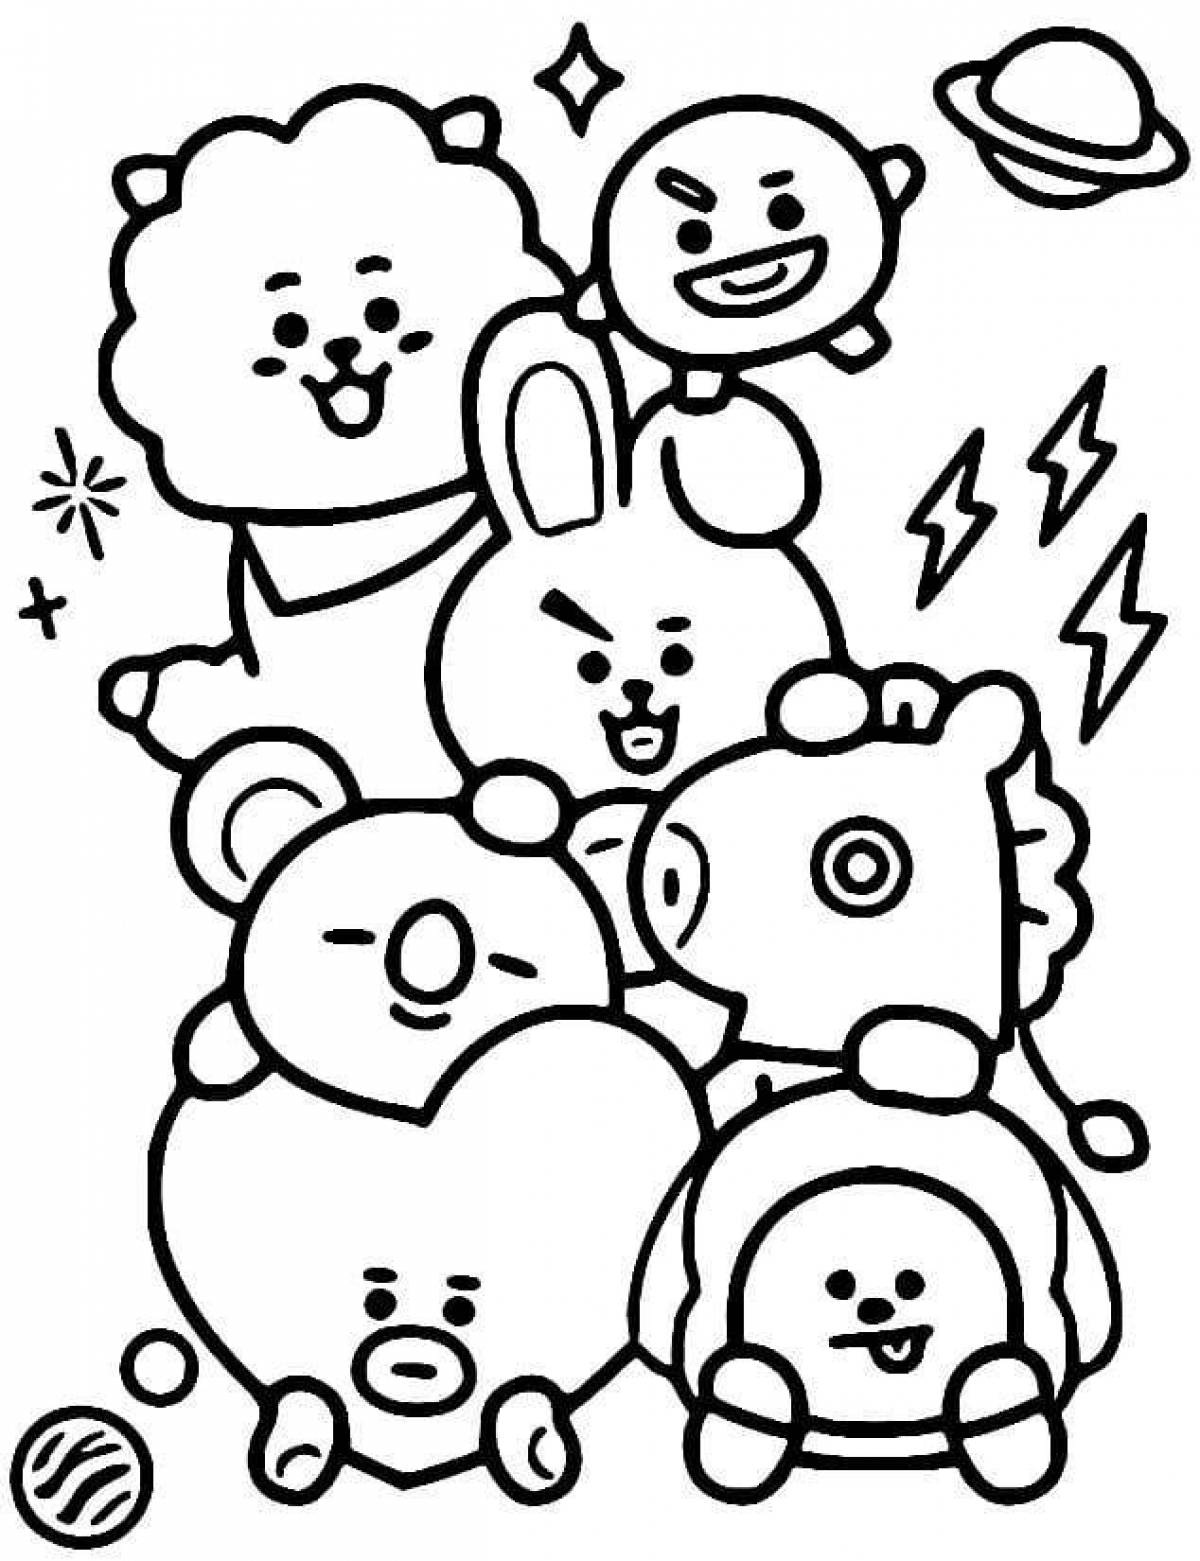 Bt21 live coloring page